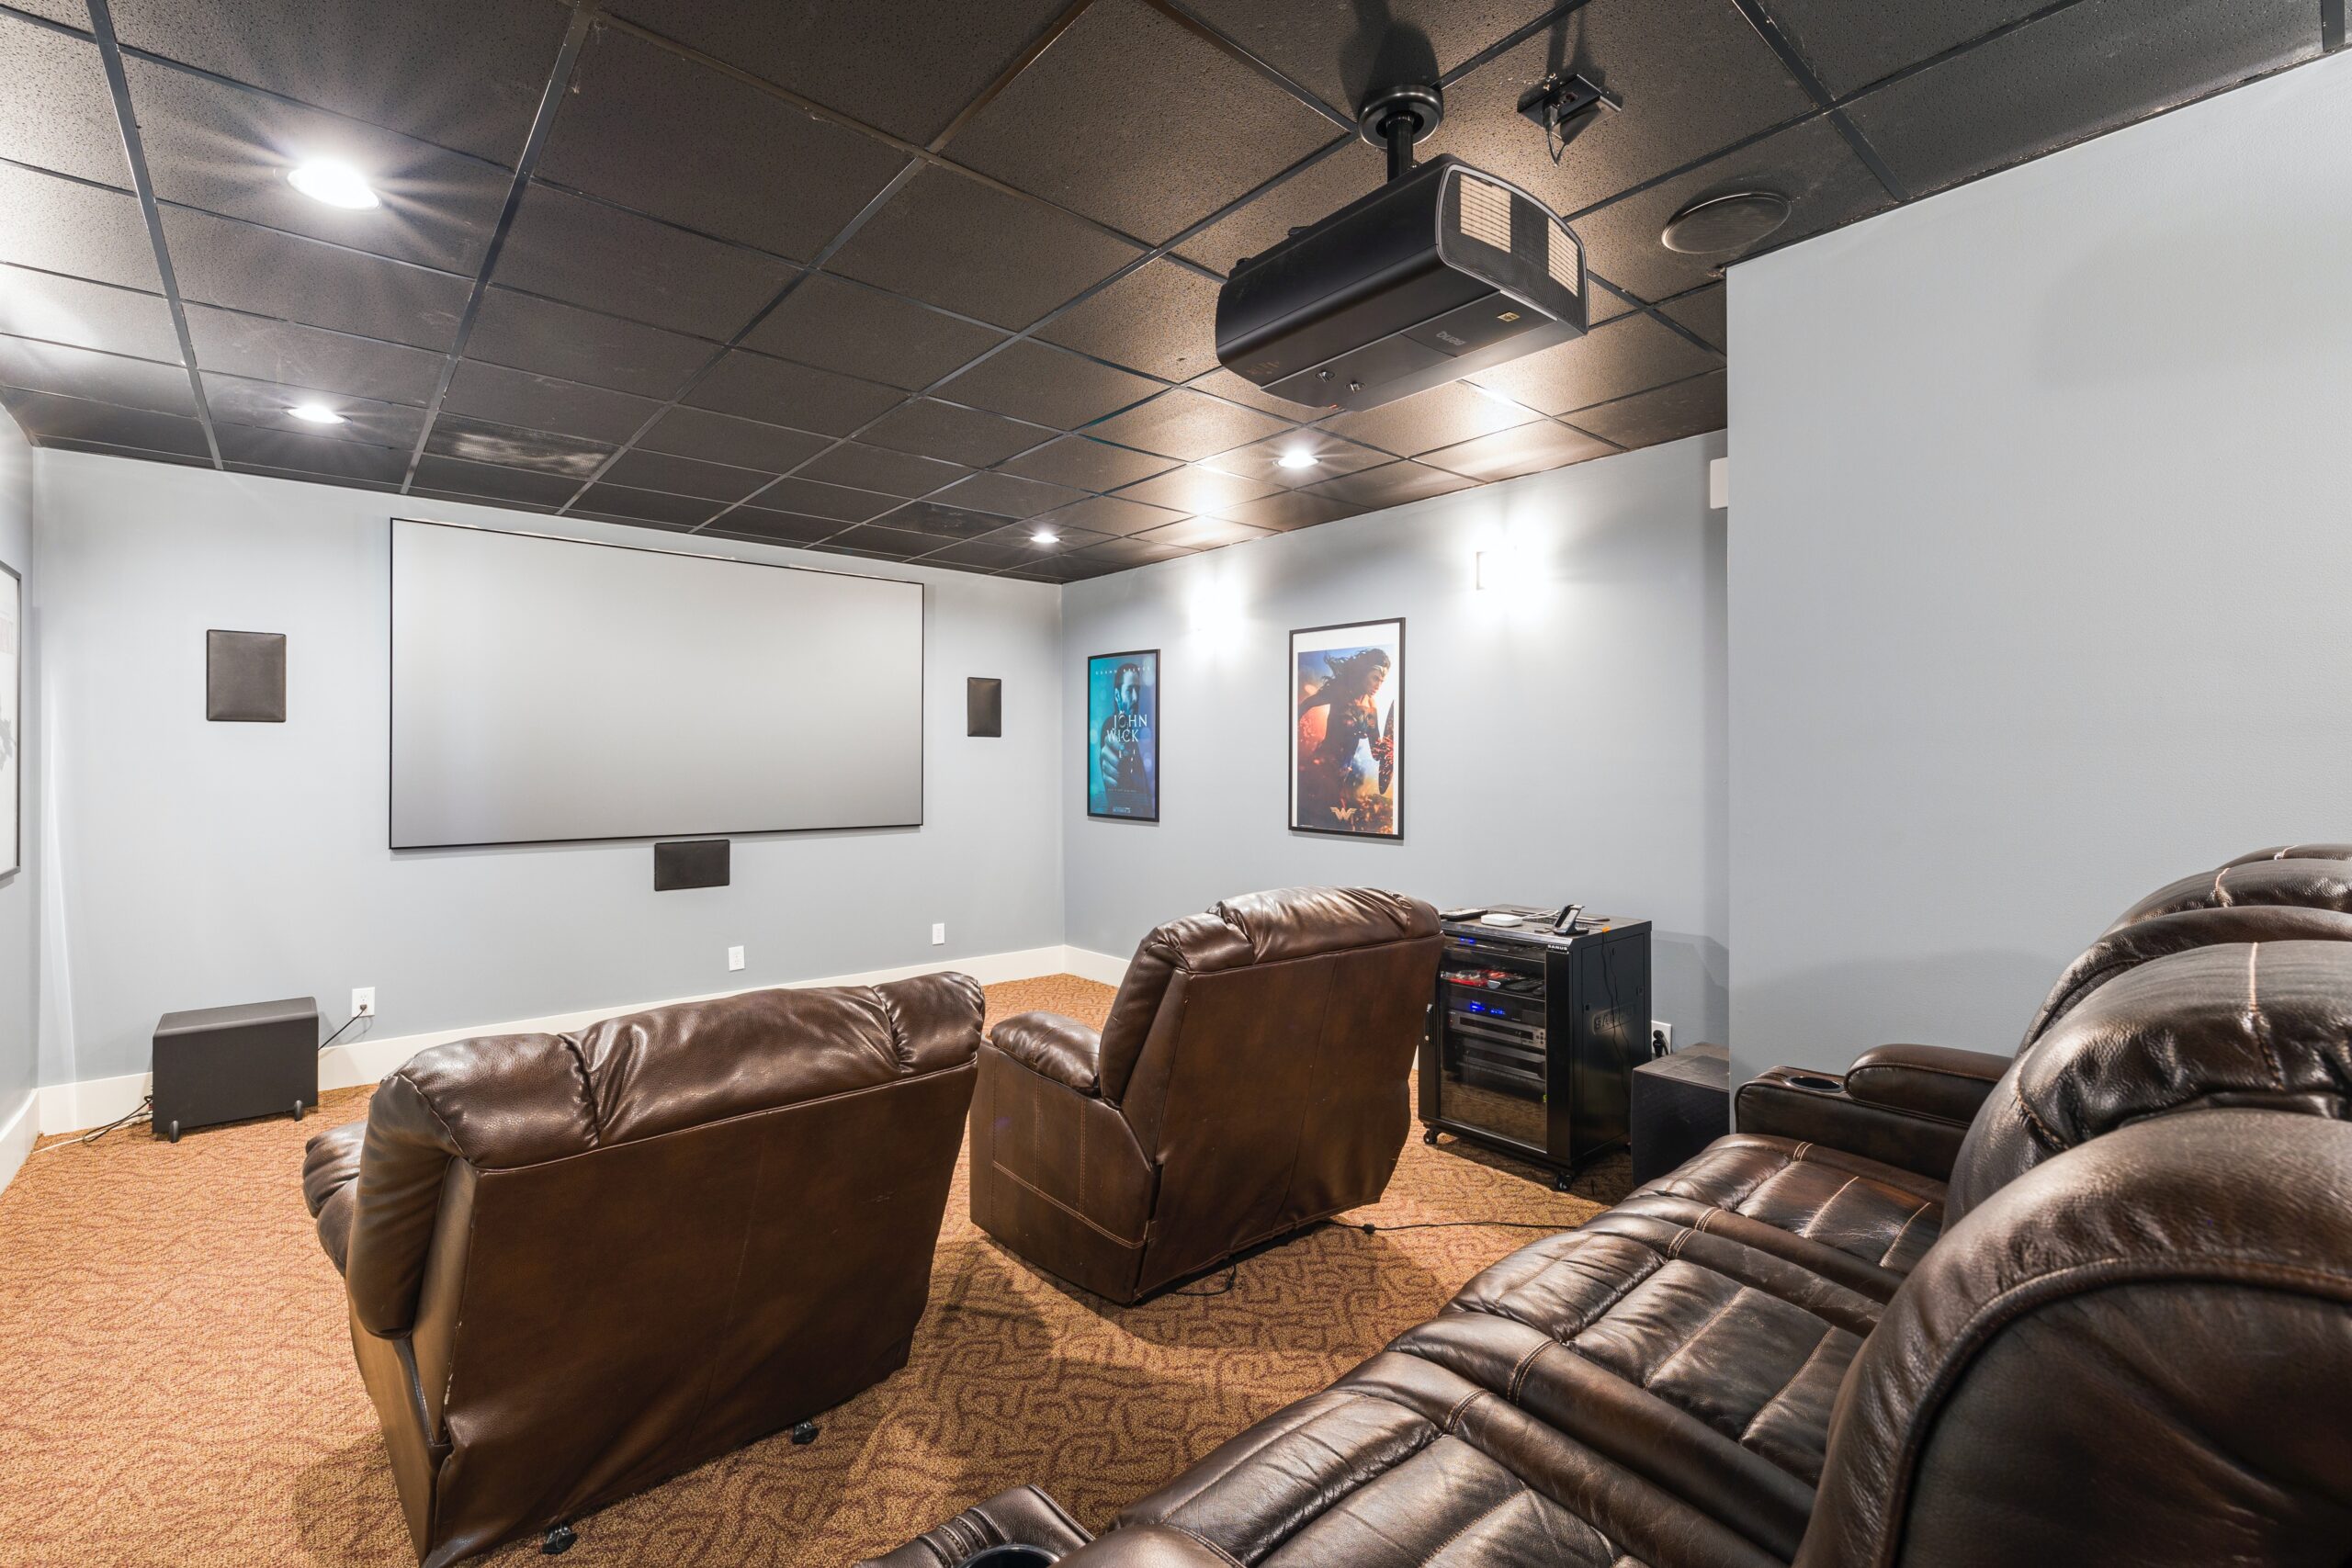 Image of a home theater